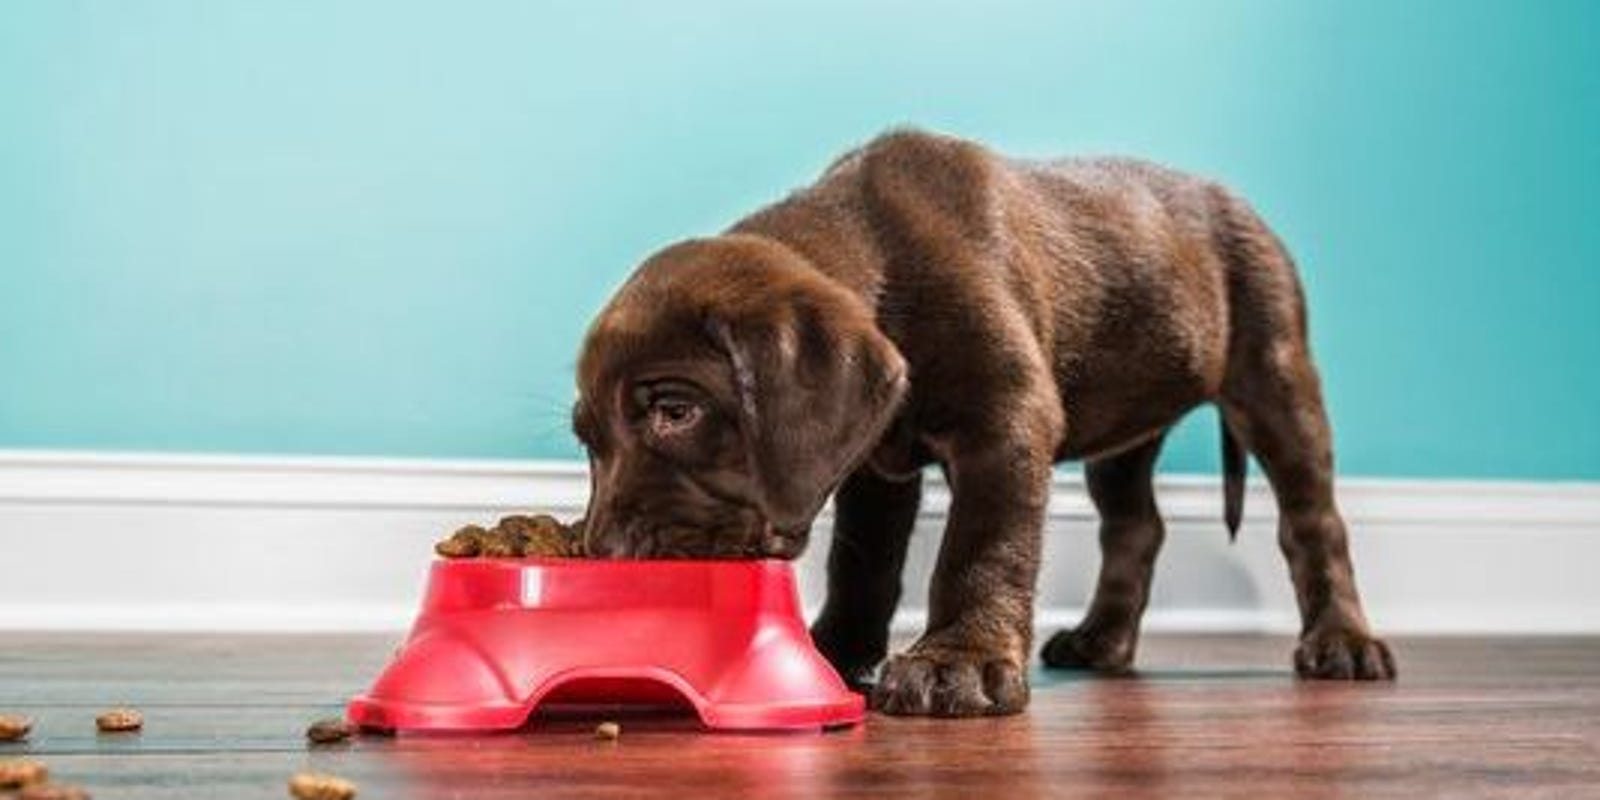  5 Top Health Tips for Your Pet